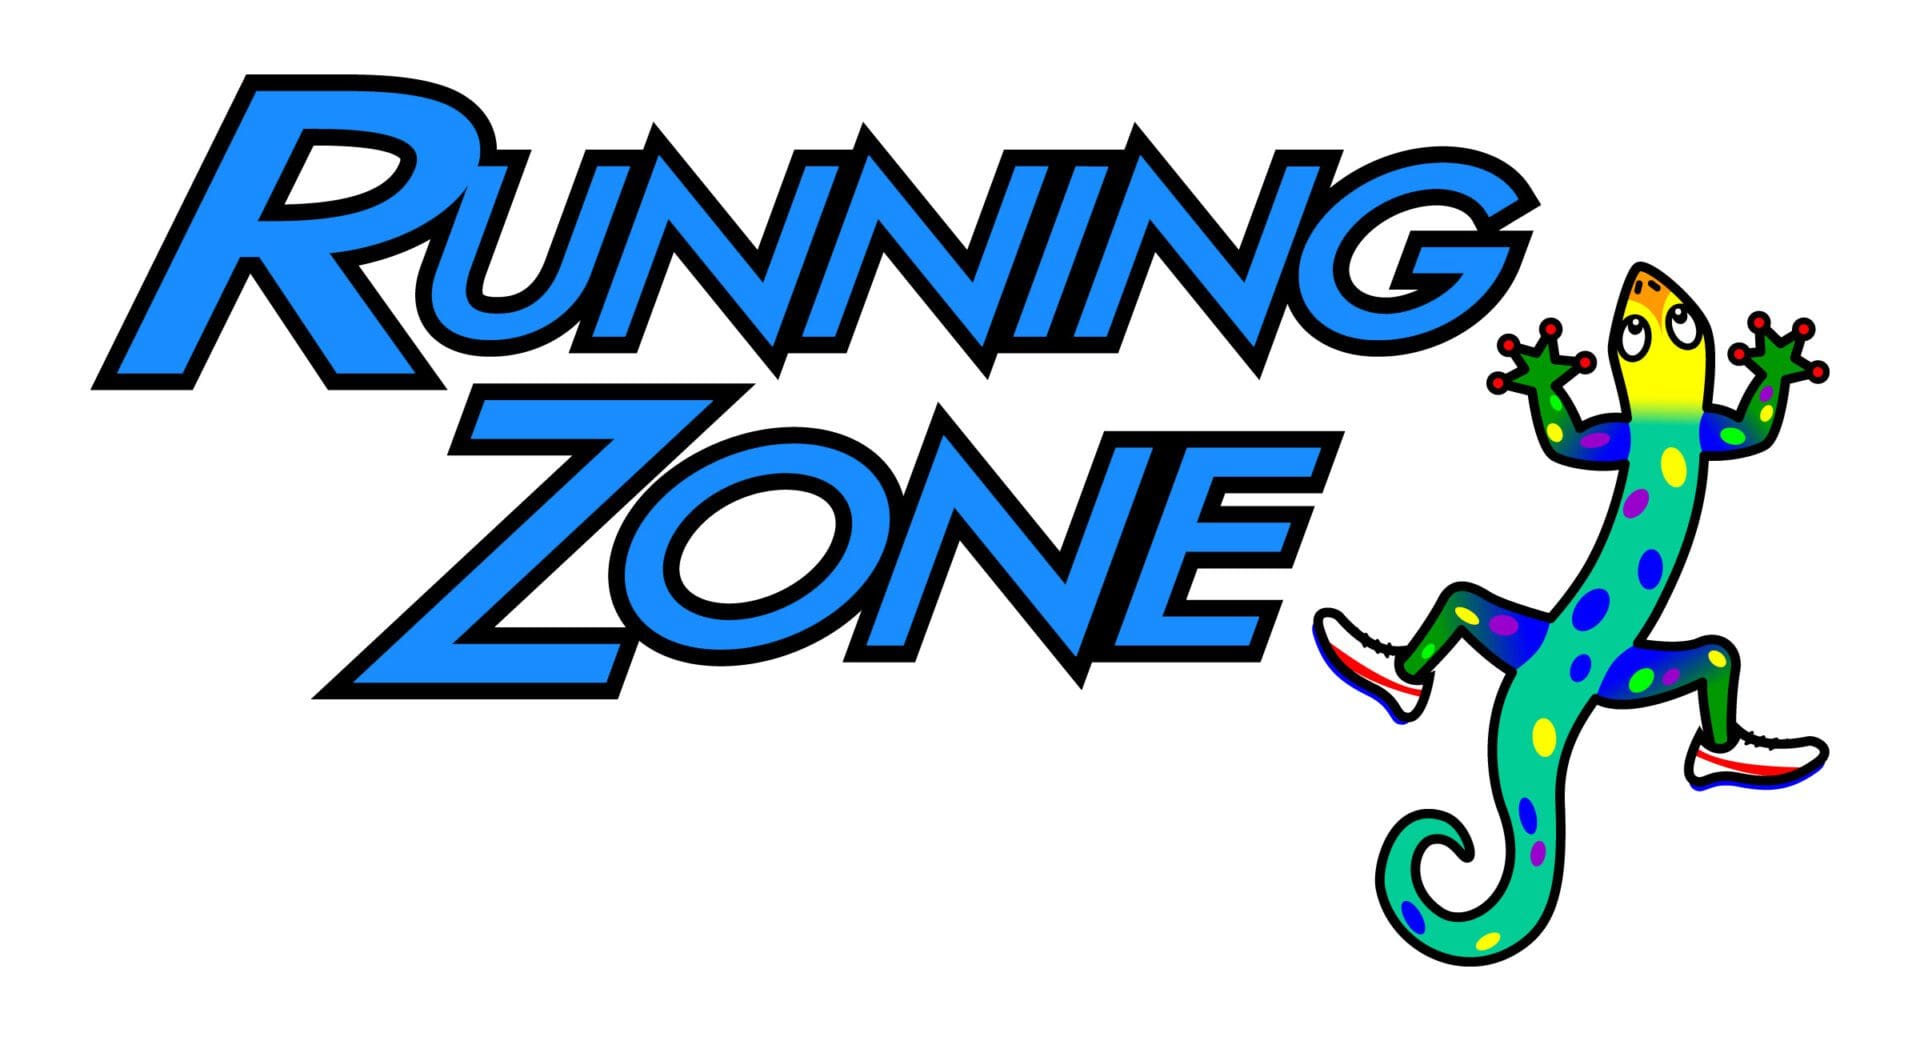 A blue running zone sign with some type of font